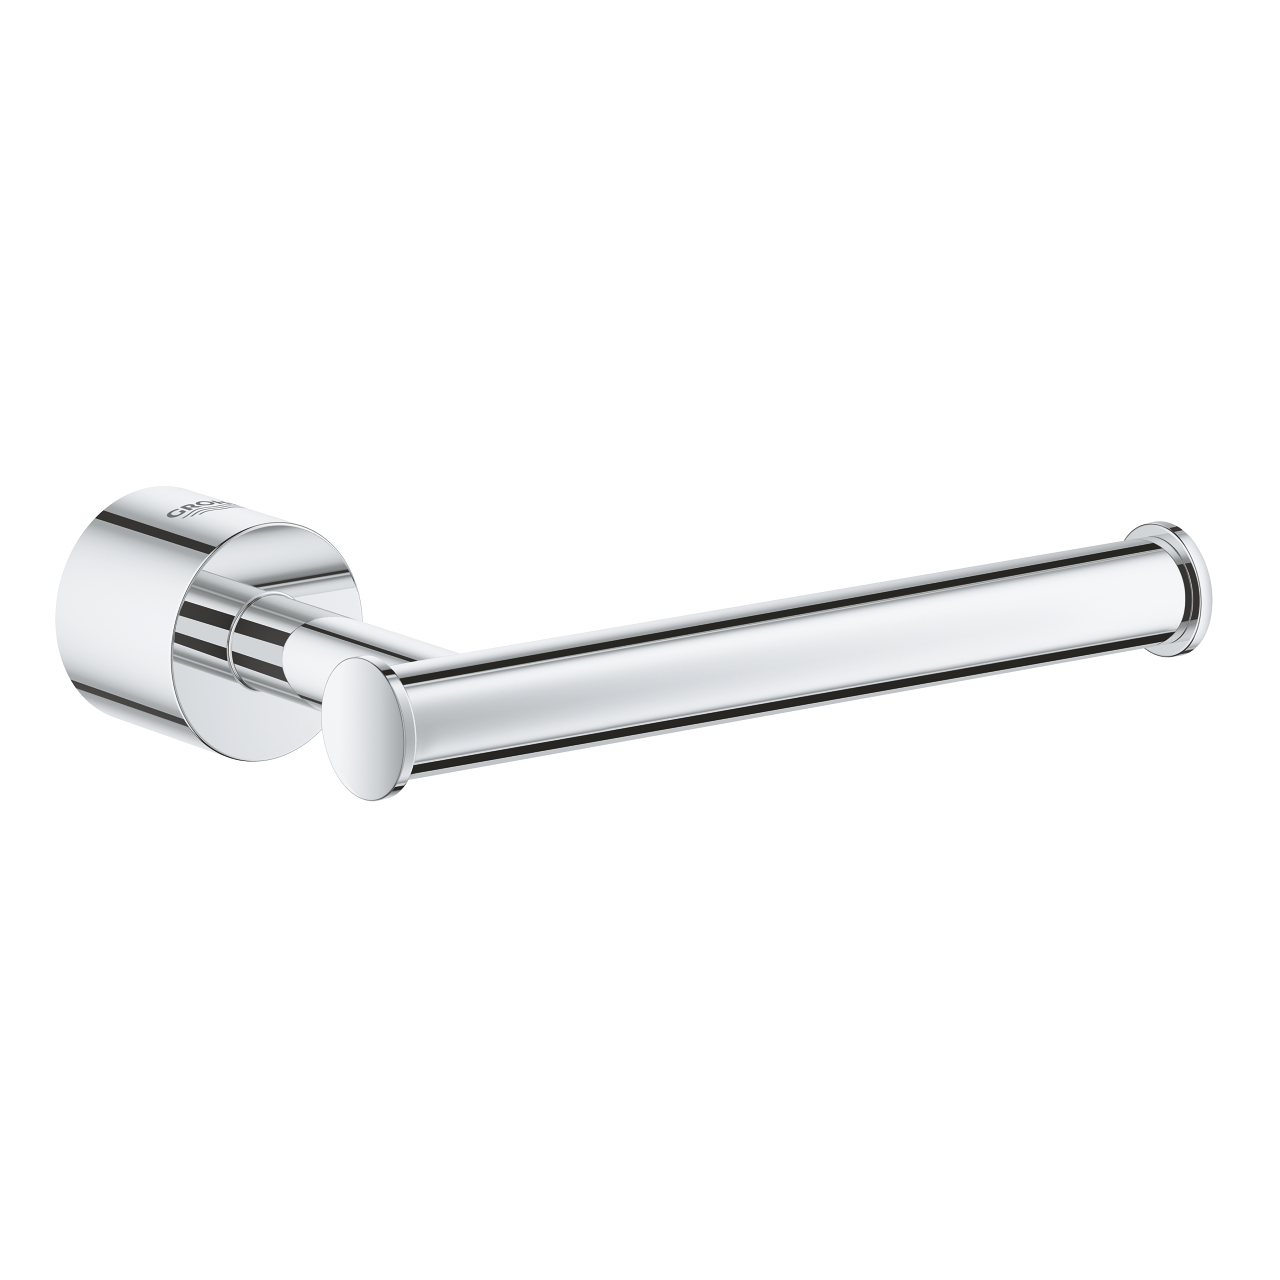 Toalettpappershållare Grohe Atrio 40313